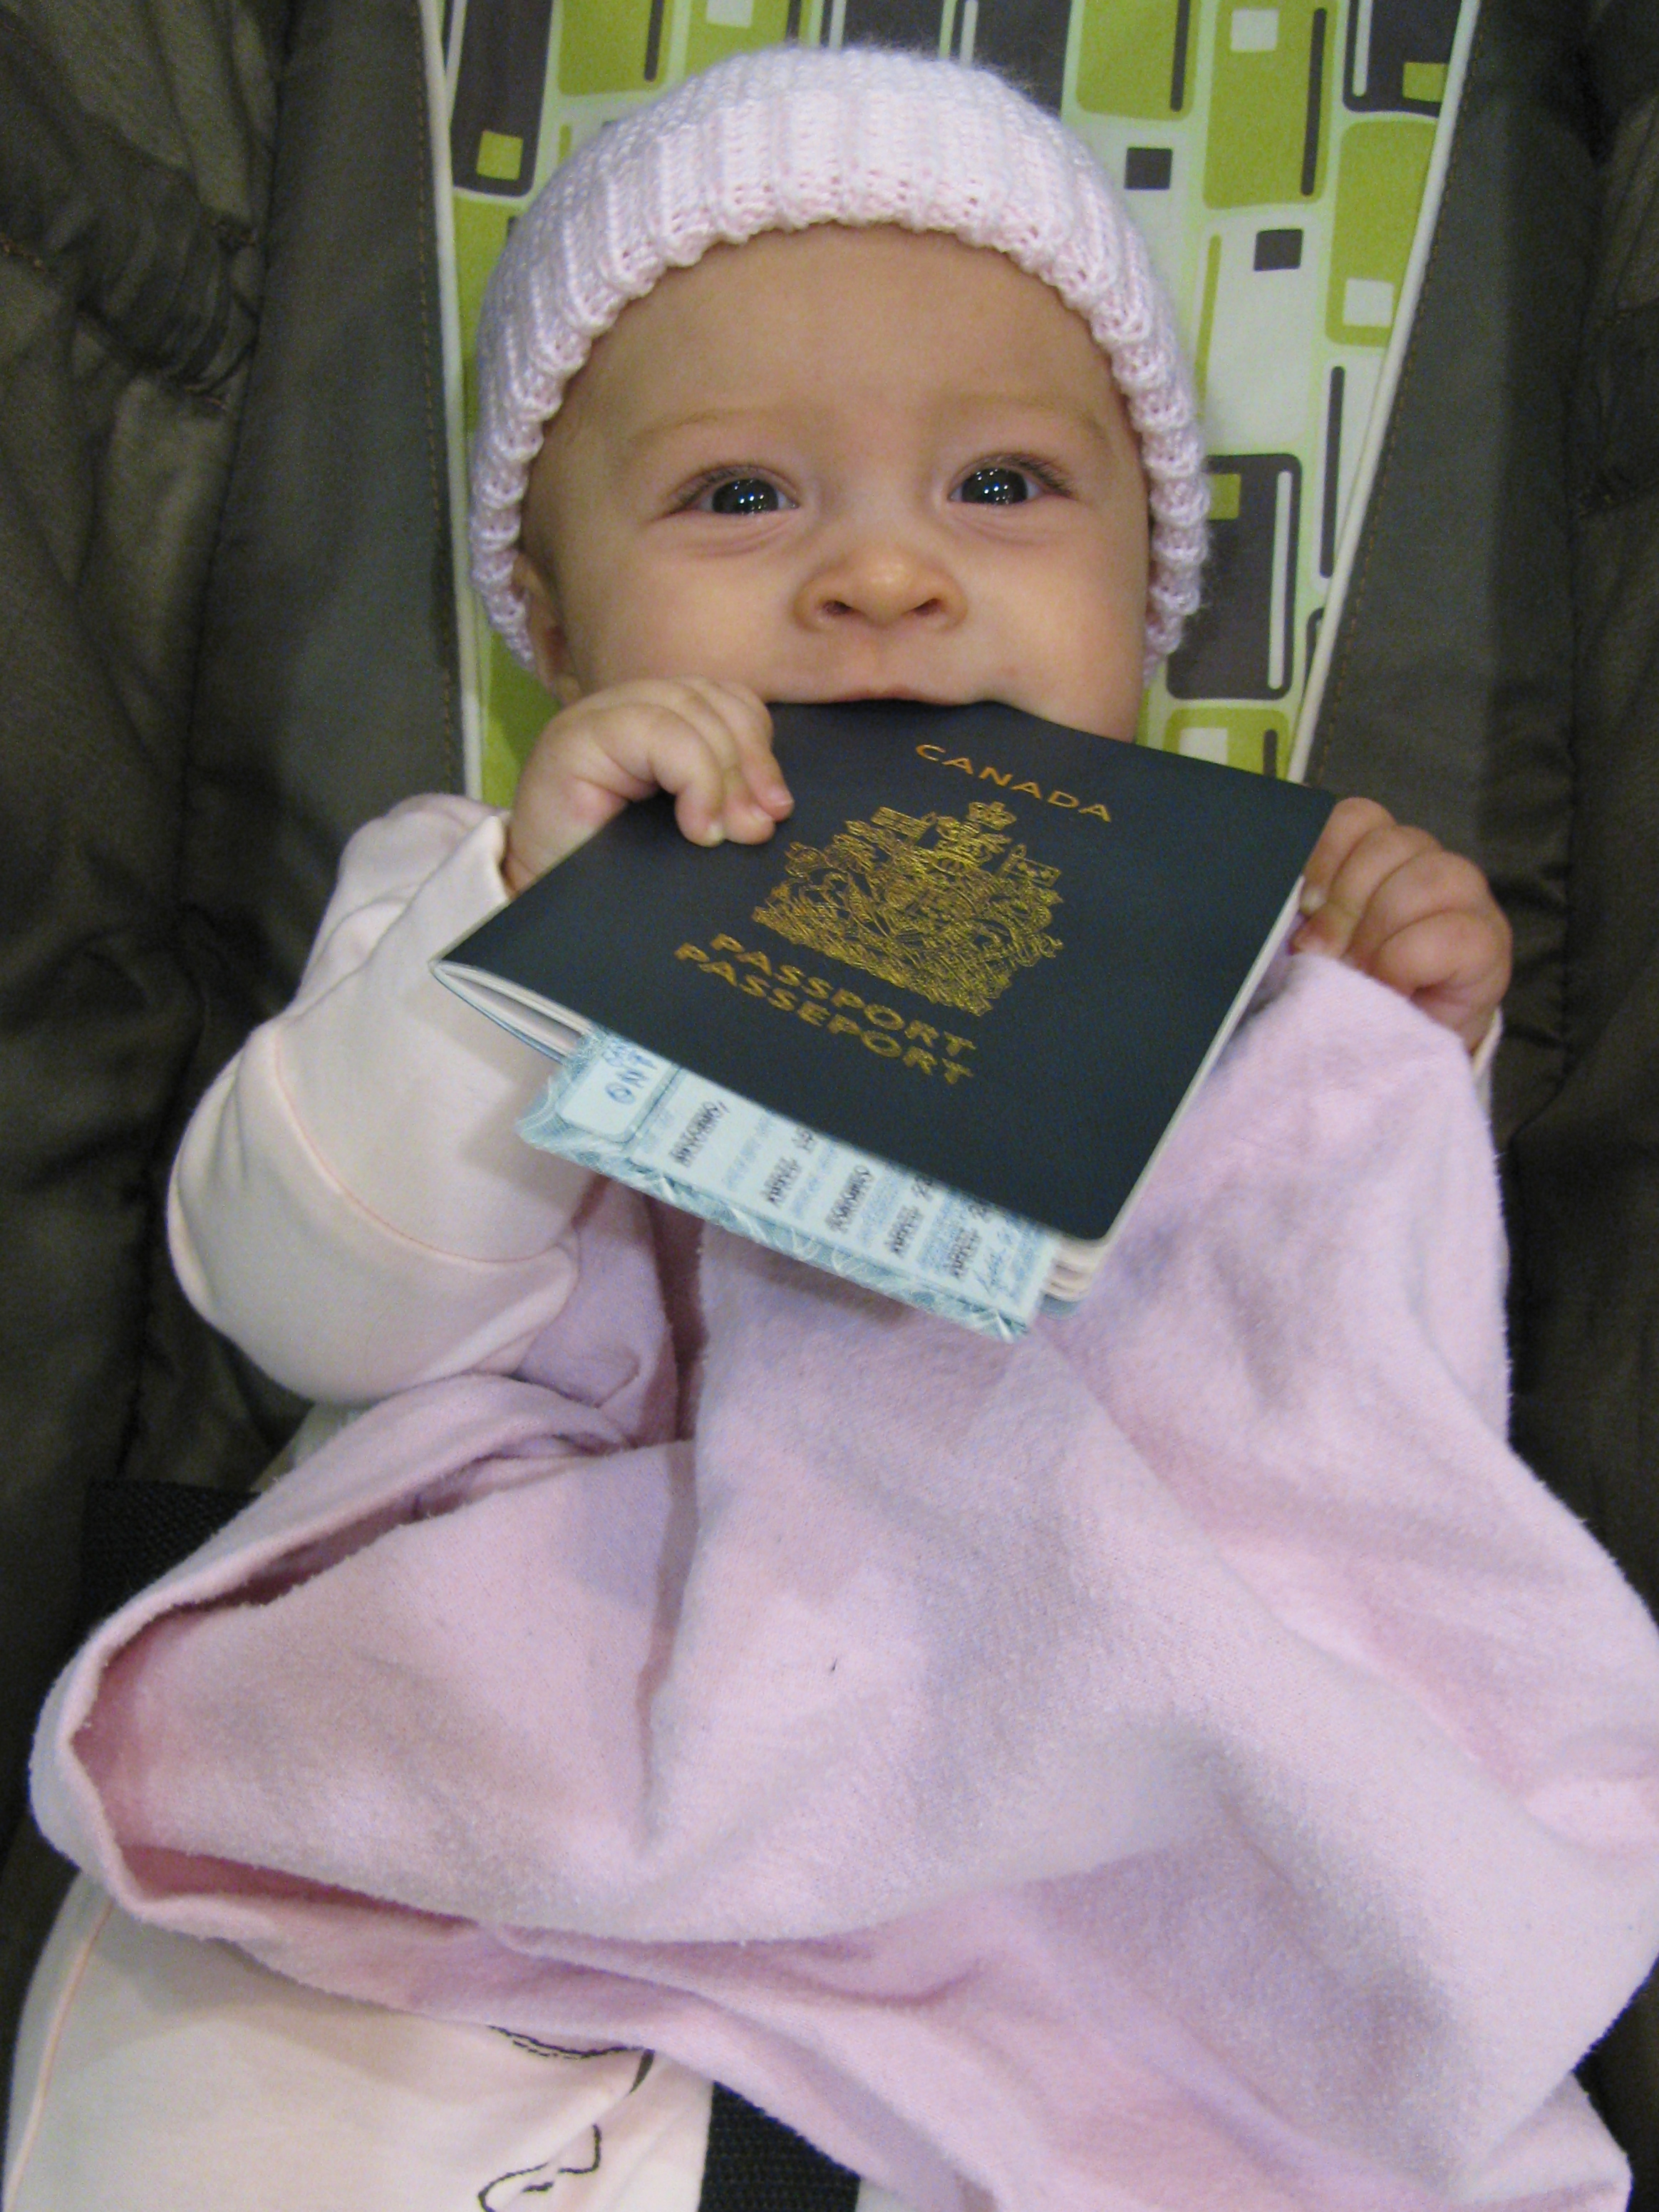 does a baby need a passport to go to canada